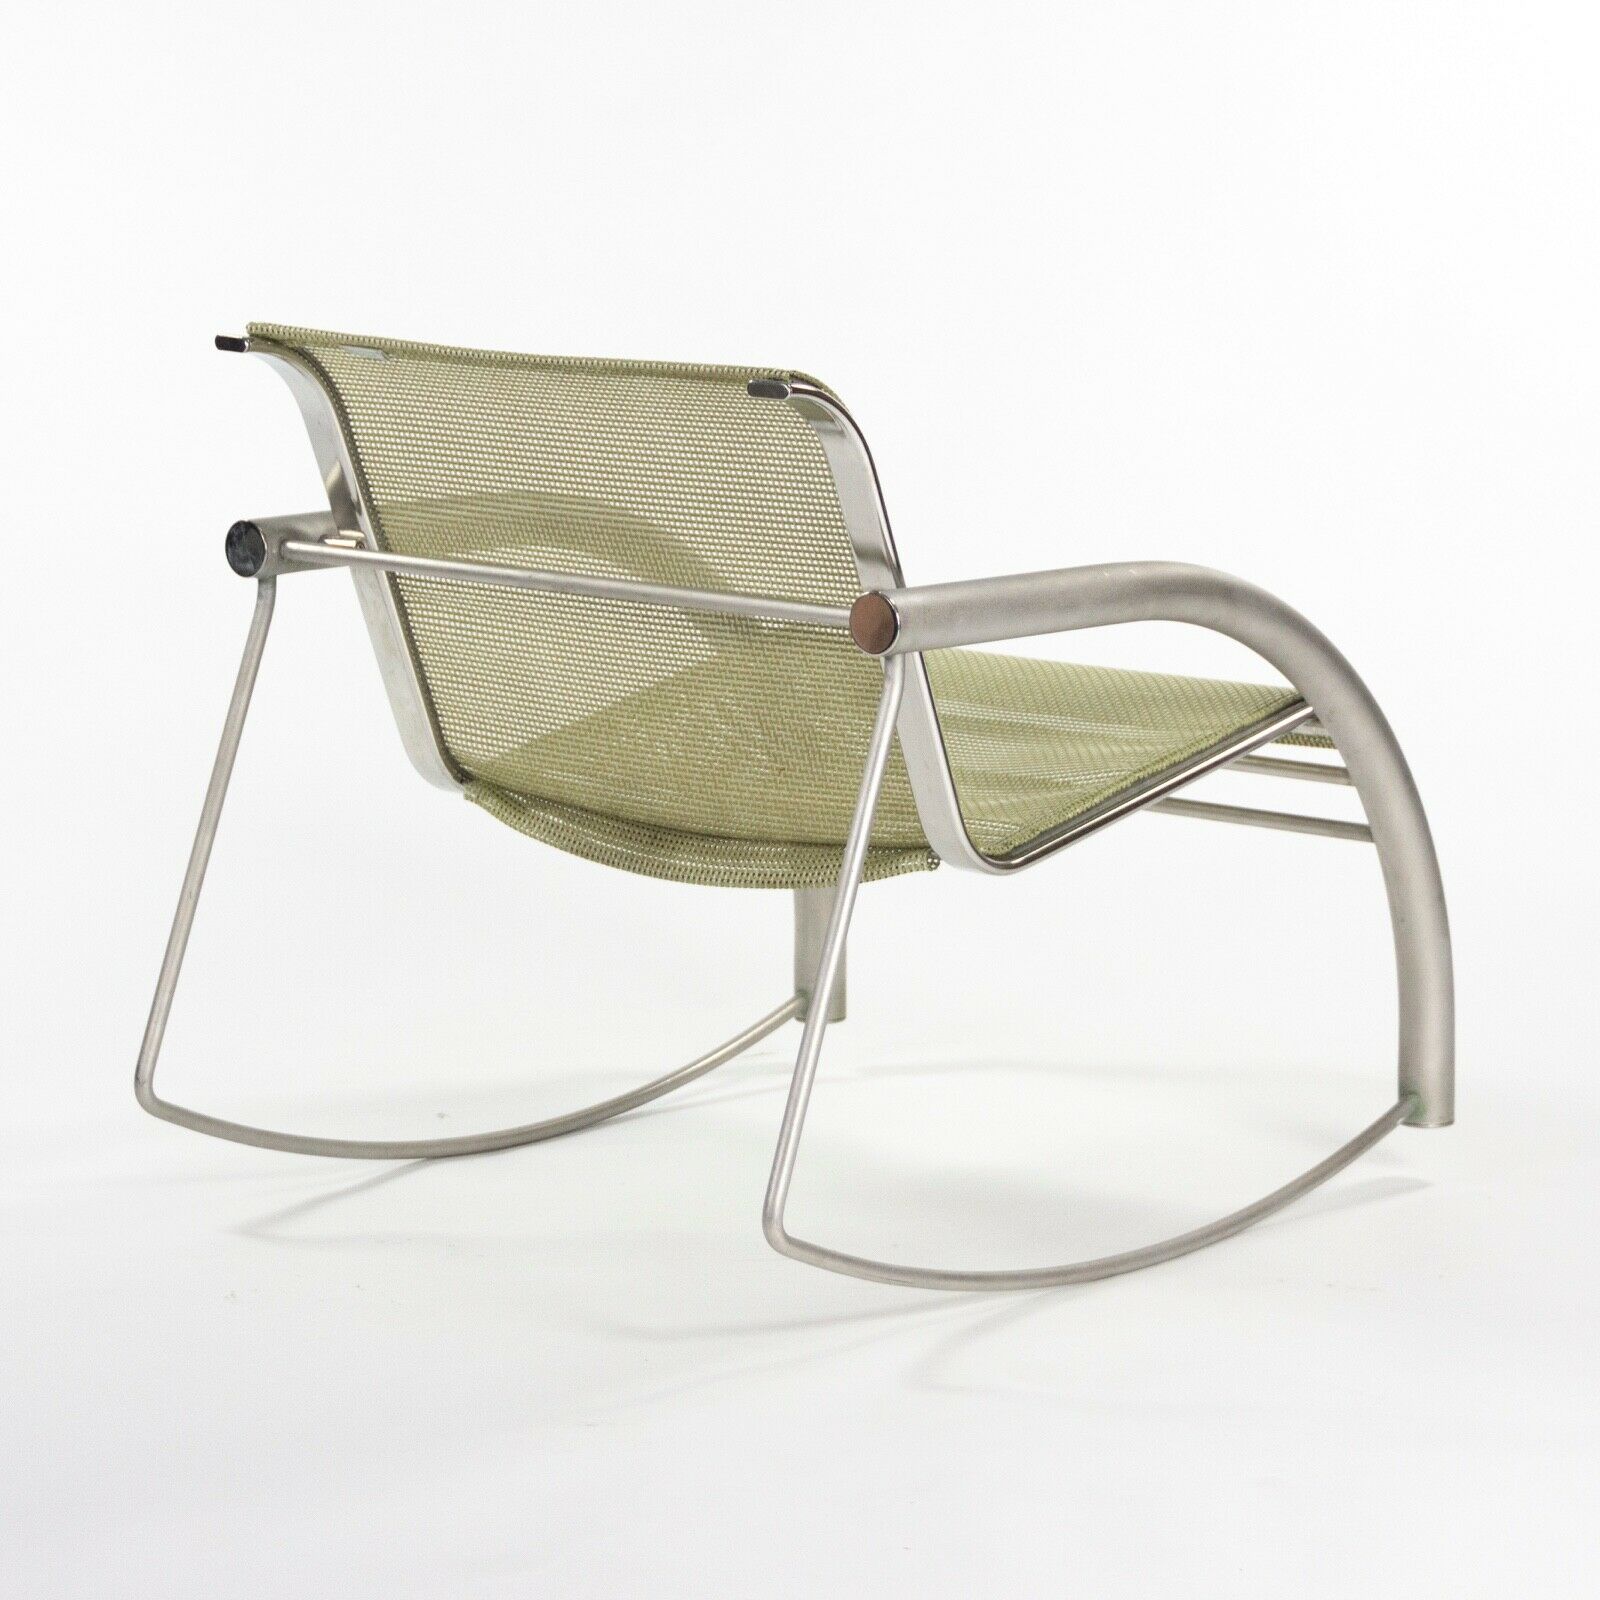 SOLD Prototype Richard Schultz 2002 Collection Stainless Steel & Mesh Rocking Chair